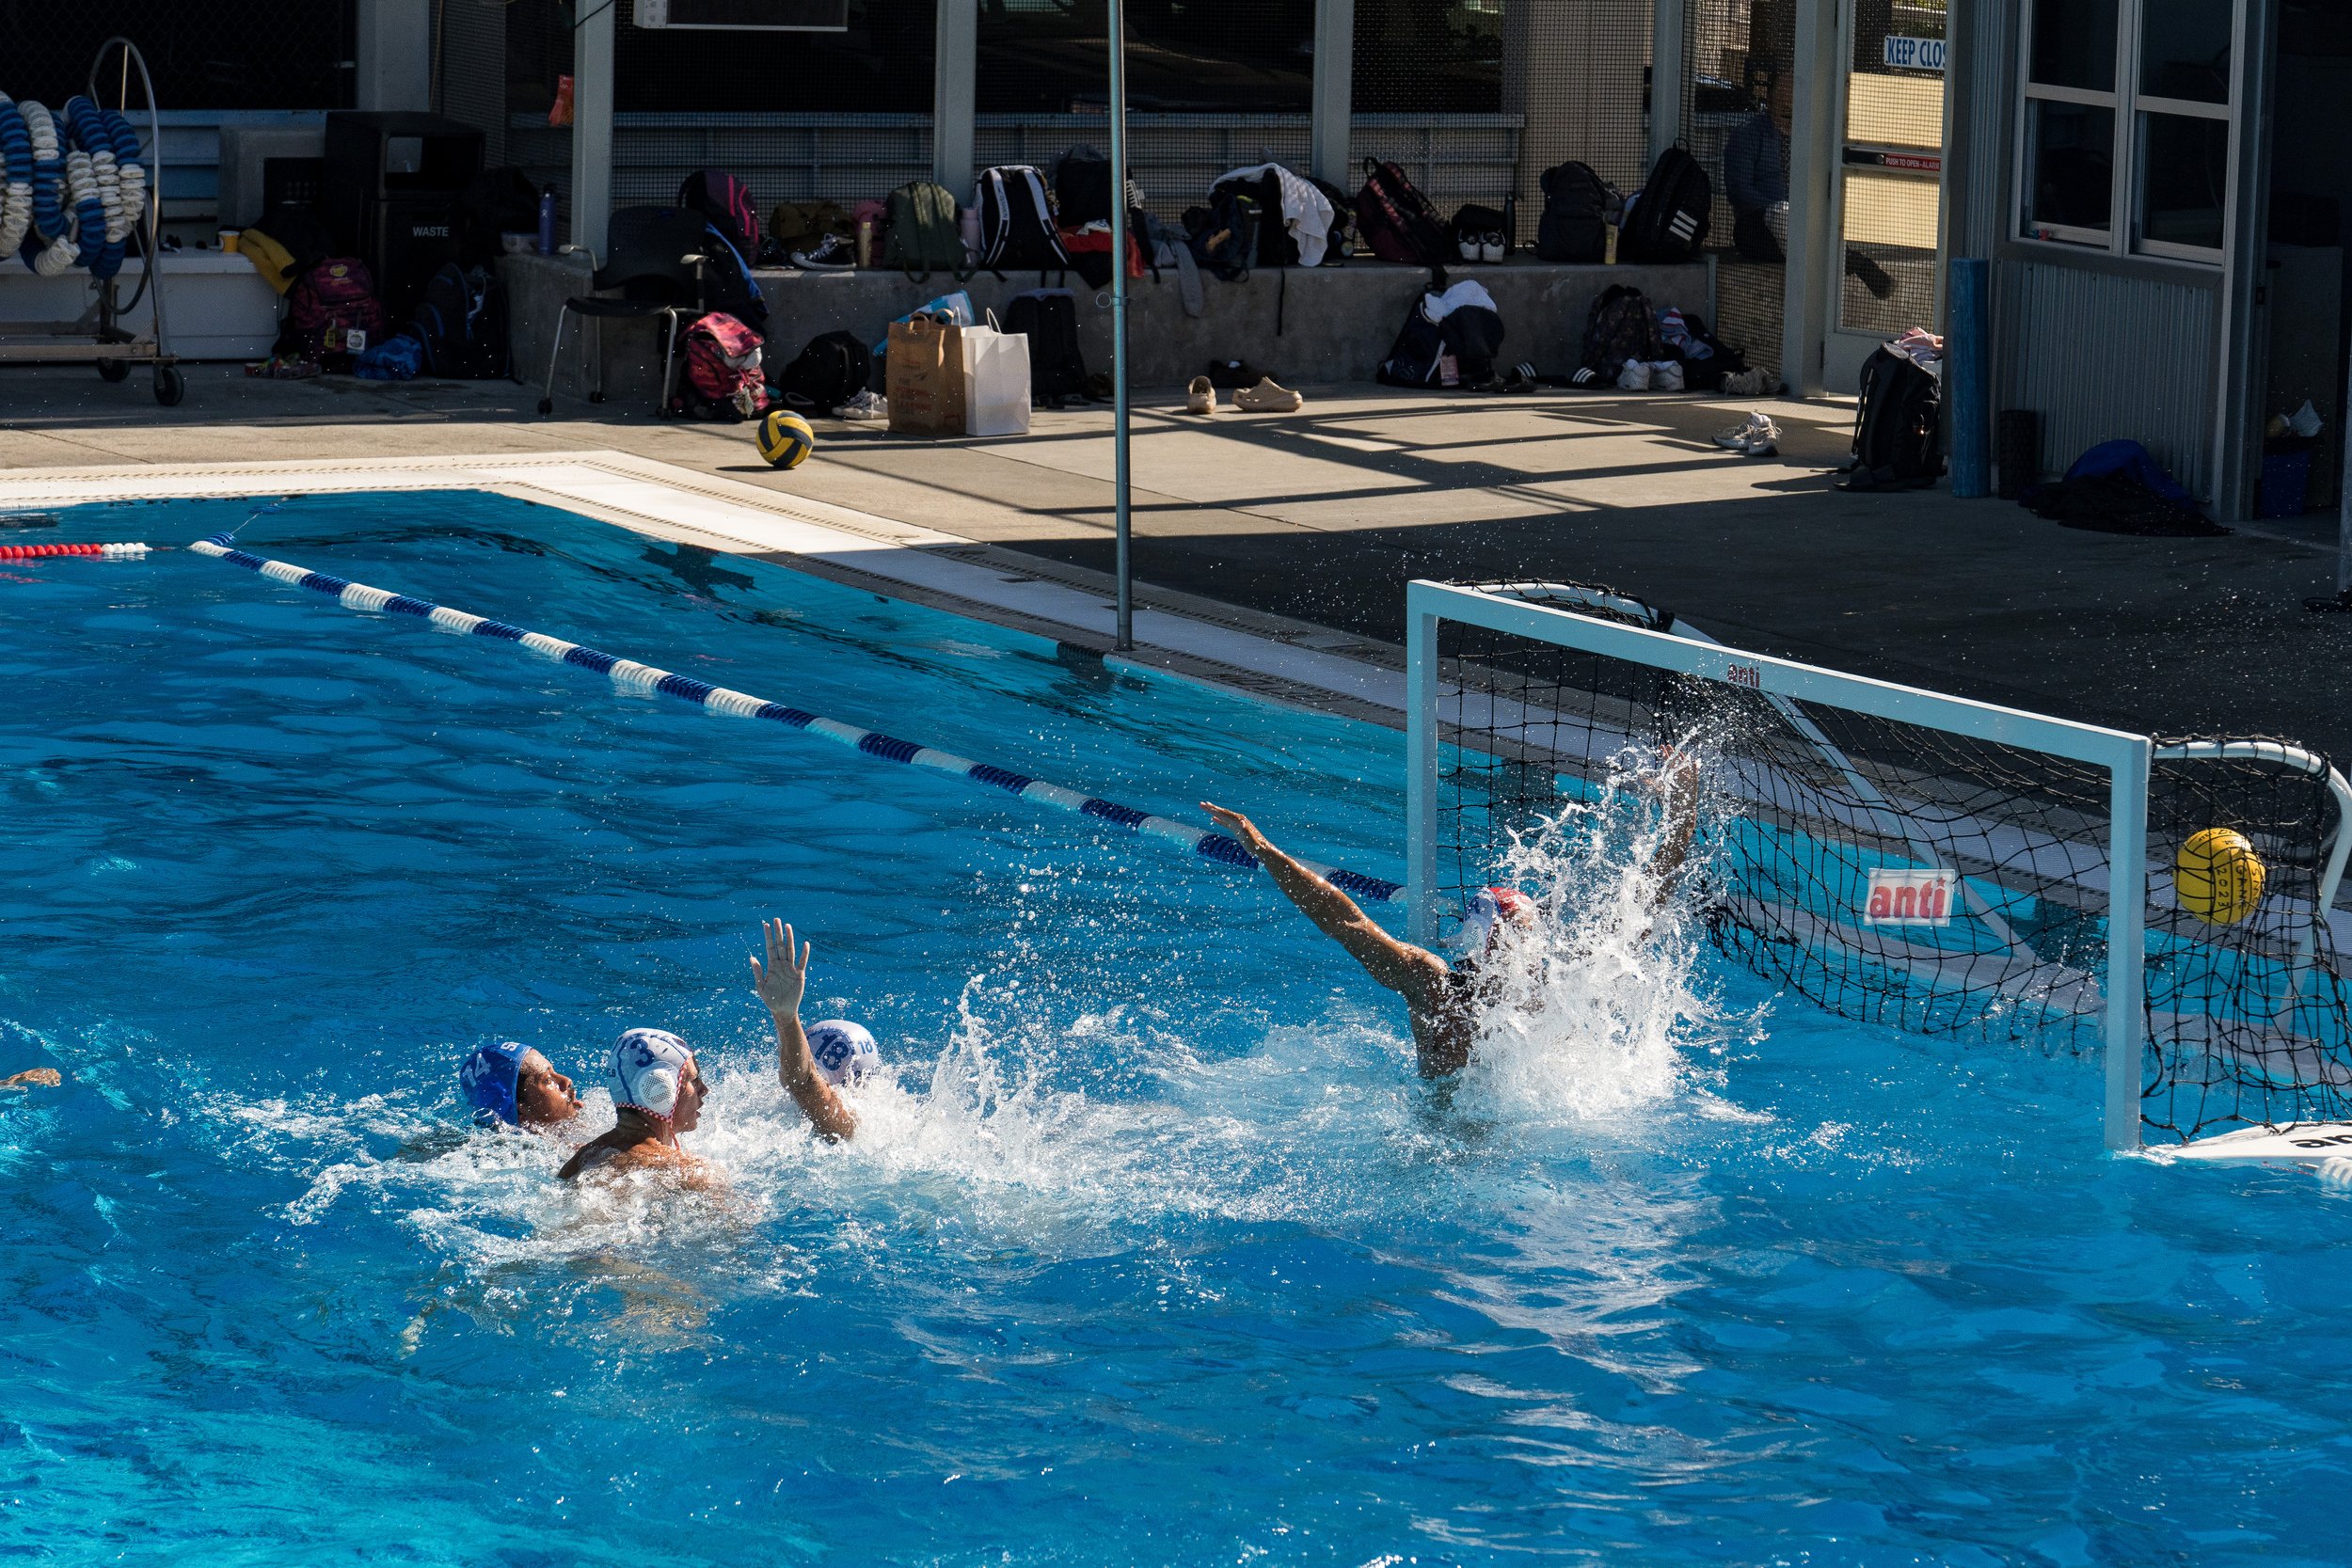  Santa Monica College (SMC) men's water polo player Marco Ruiz (14) scores a goal against the Citrus College Owls in the 4th quarter at the SMC Water Polo Conference on Thursday October 5th, 2023 in Santa Monica, Calif. The final score was 15-6, with